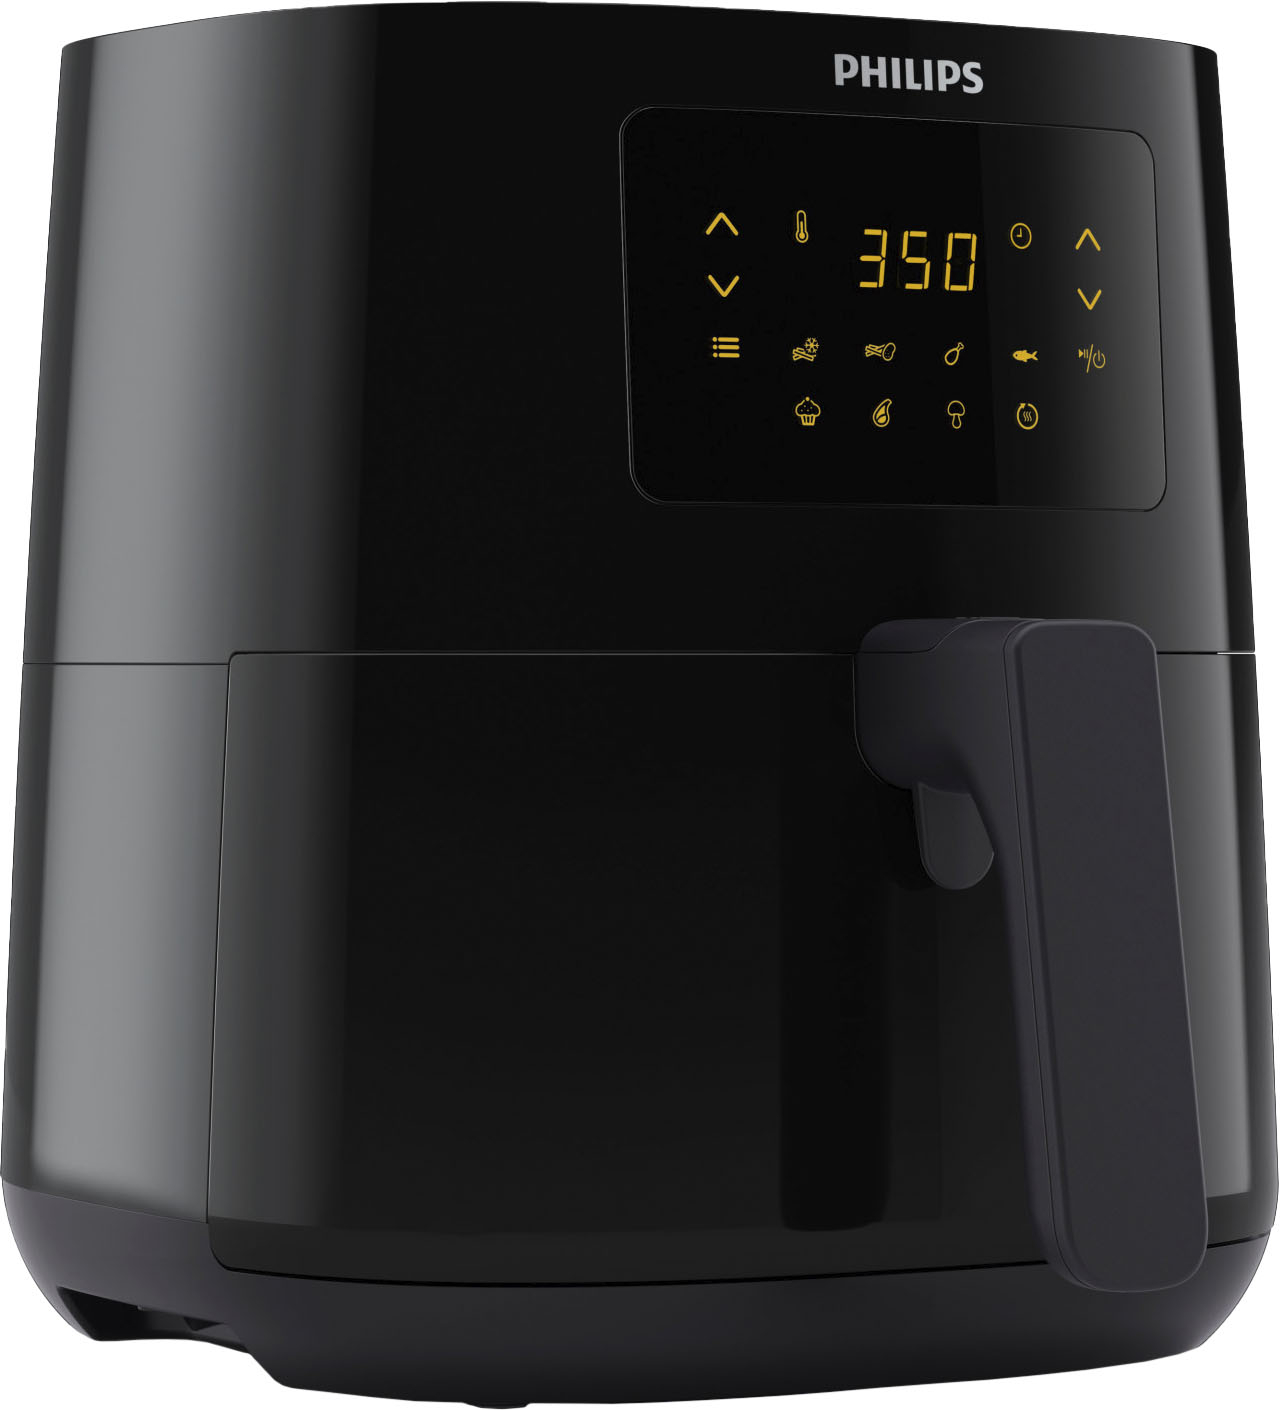 PHILIPS Digital Air Fryer HD9252/90 With Touch Panel, Uses Up To 90% Less  Fat, 7 Pre-set Menu, 1400W, 4.1 Liter, With Rapid Air Technology (Black),  Large - Velan Store